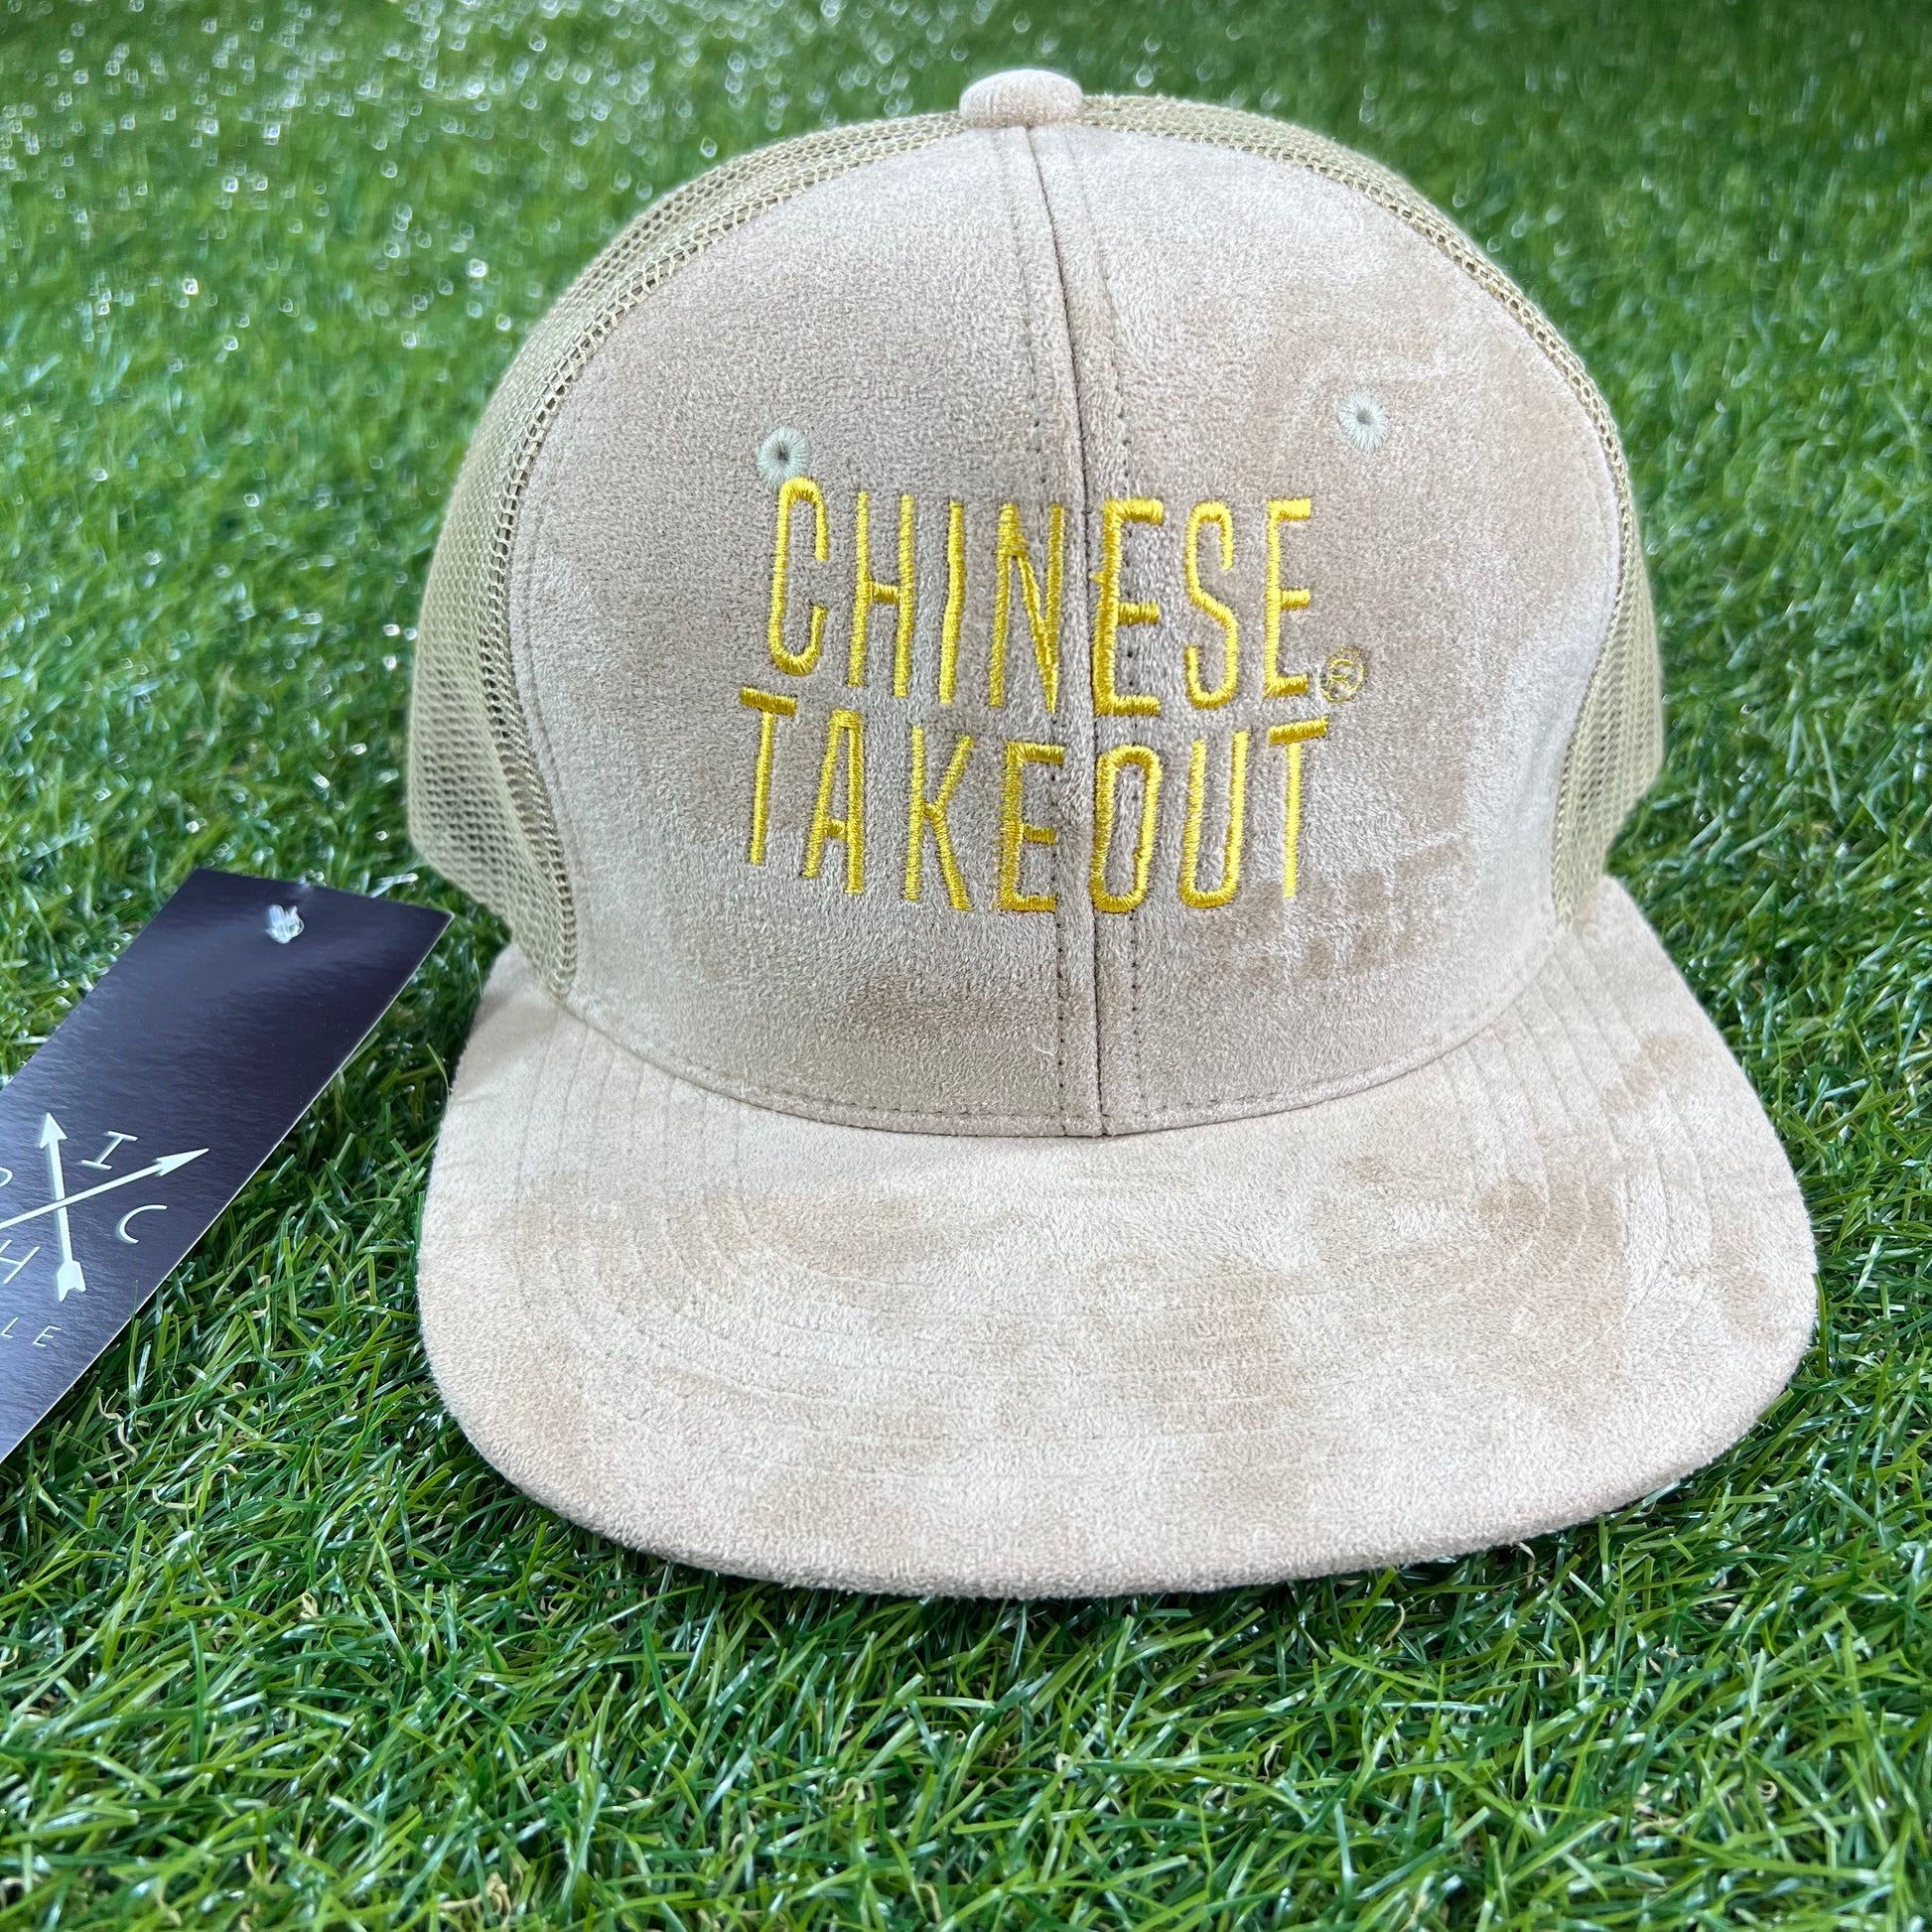  Hats, Gold Hats, Trucker, Style, Snapback, Men, Boys, Teens, Gifts, Hat, Nix Smith Co, Urban, Wmns, Girls, Khaki Hat, Khaki and Gold Hat, Fitted Hats, Fashion,